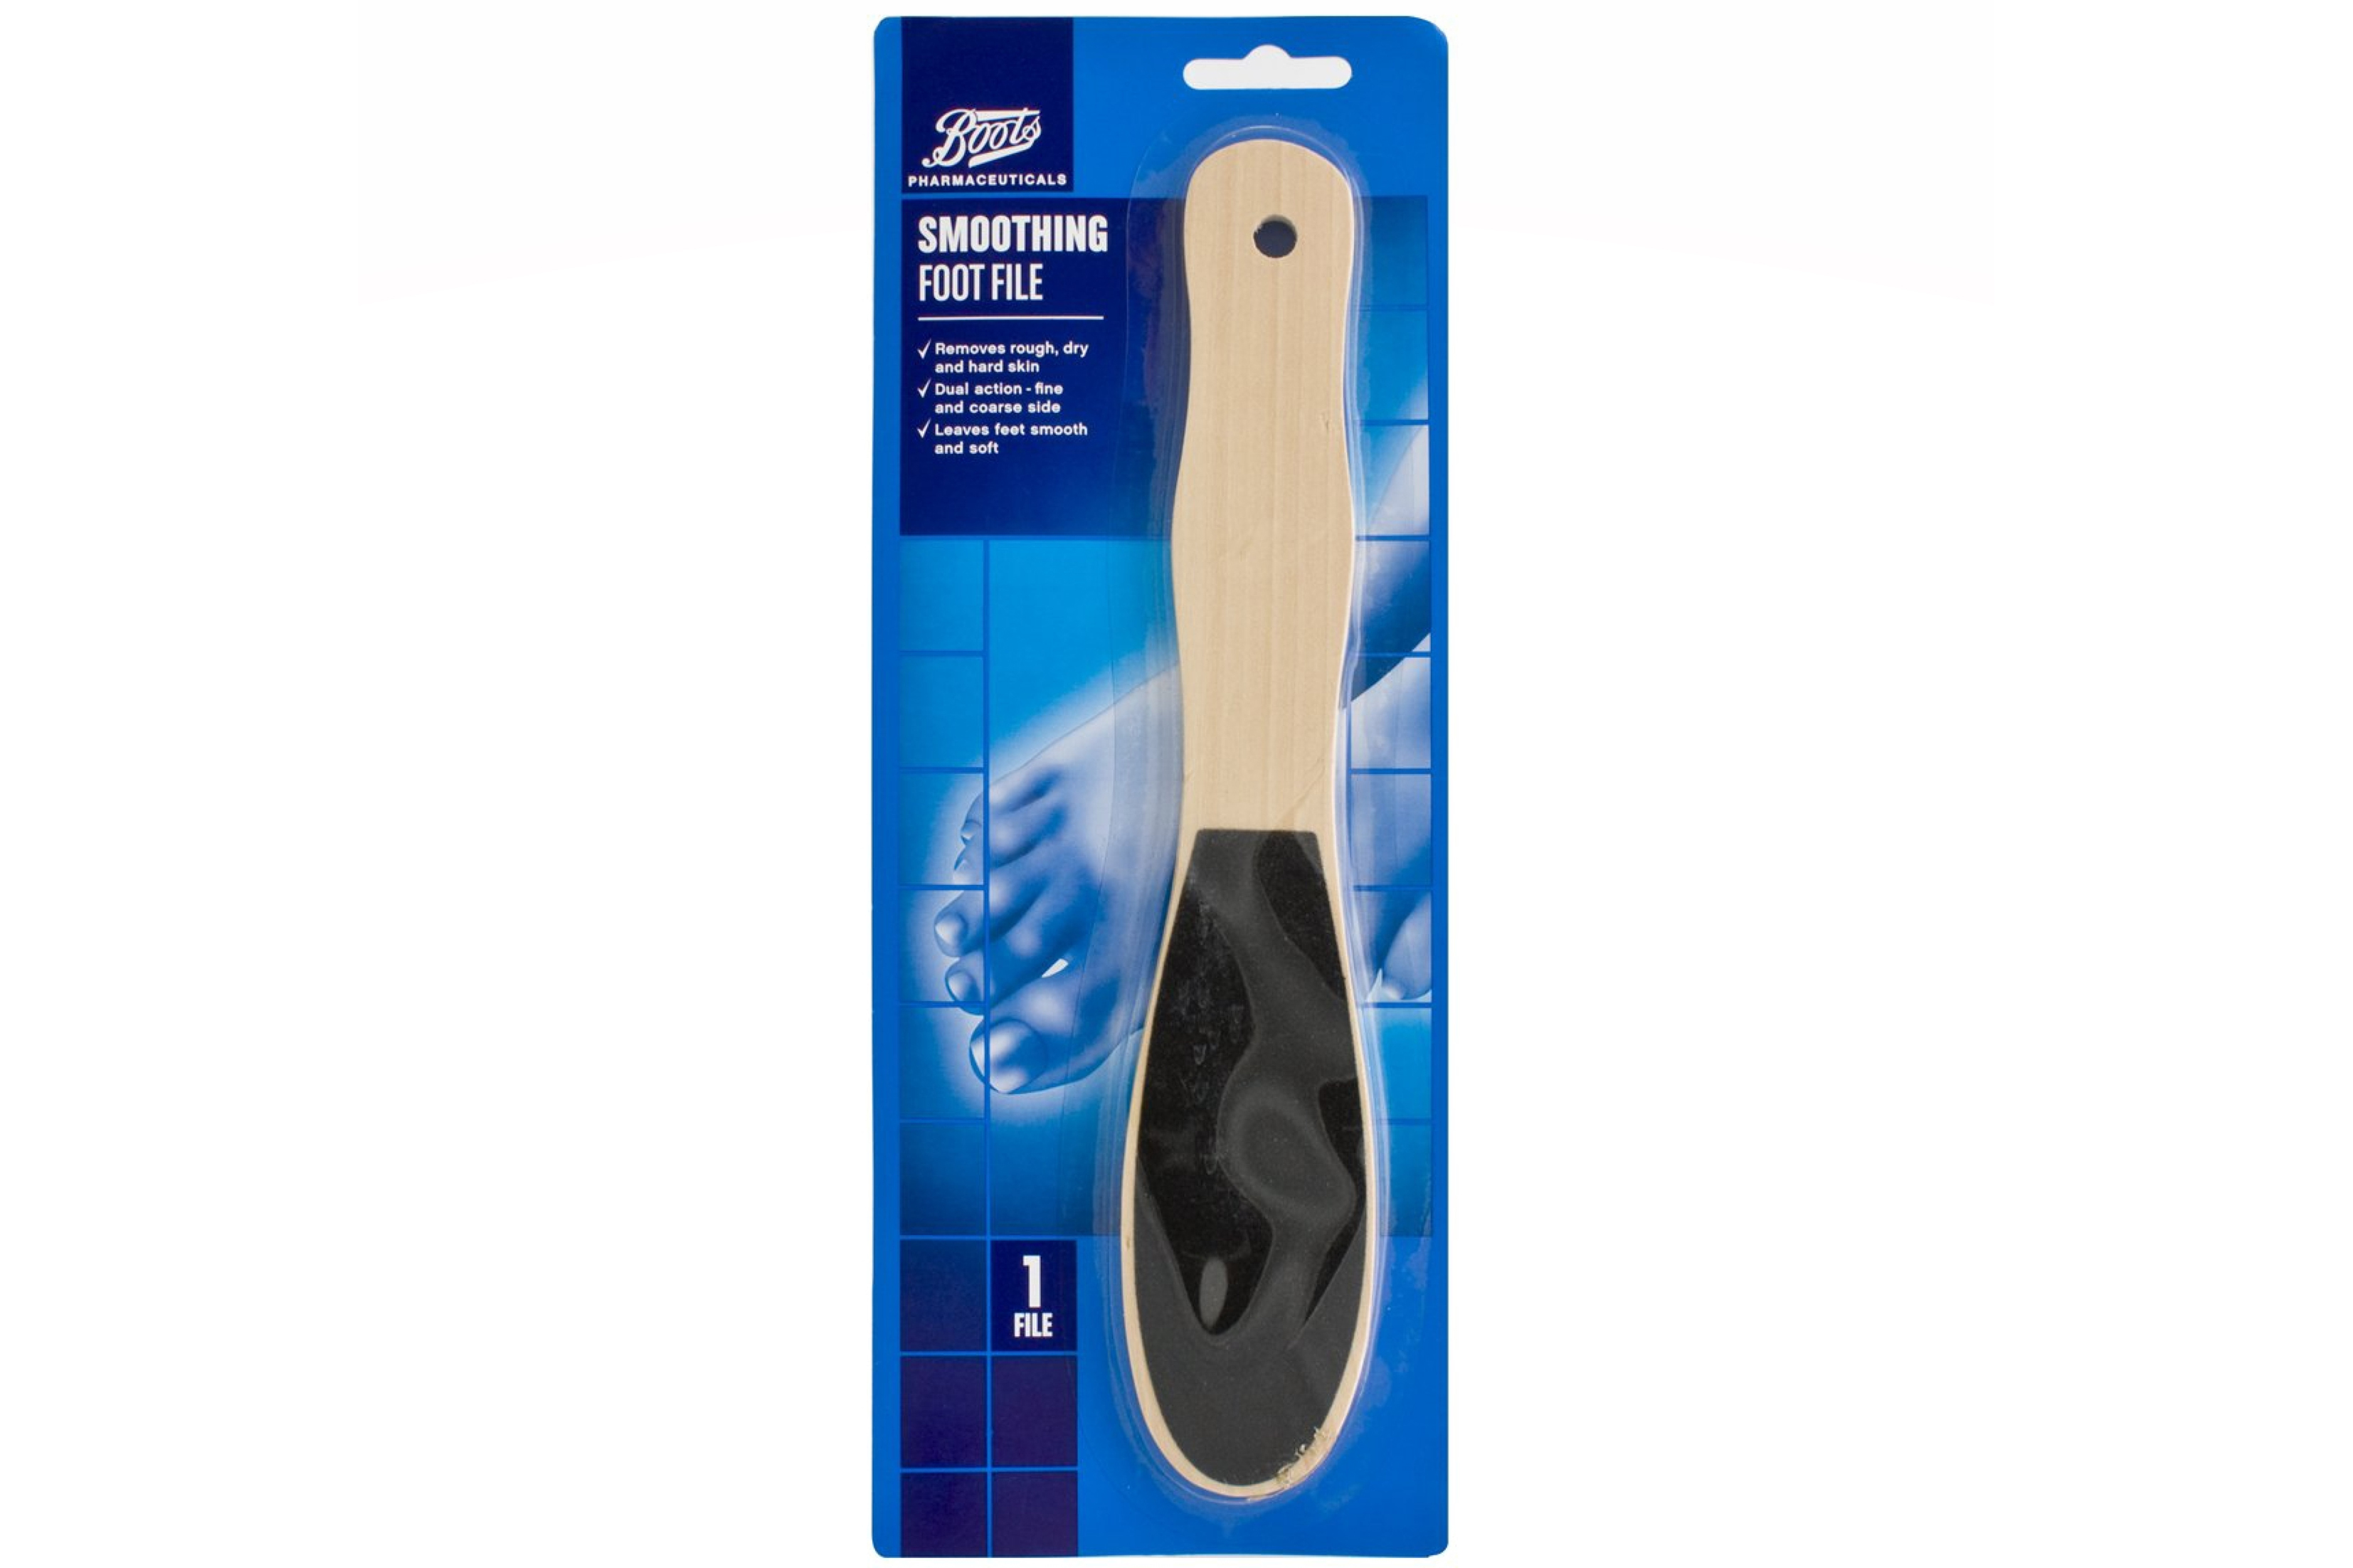 Boots Pharmaceuticals Smoothing Foot File, £3.23